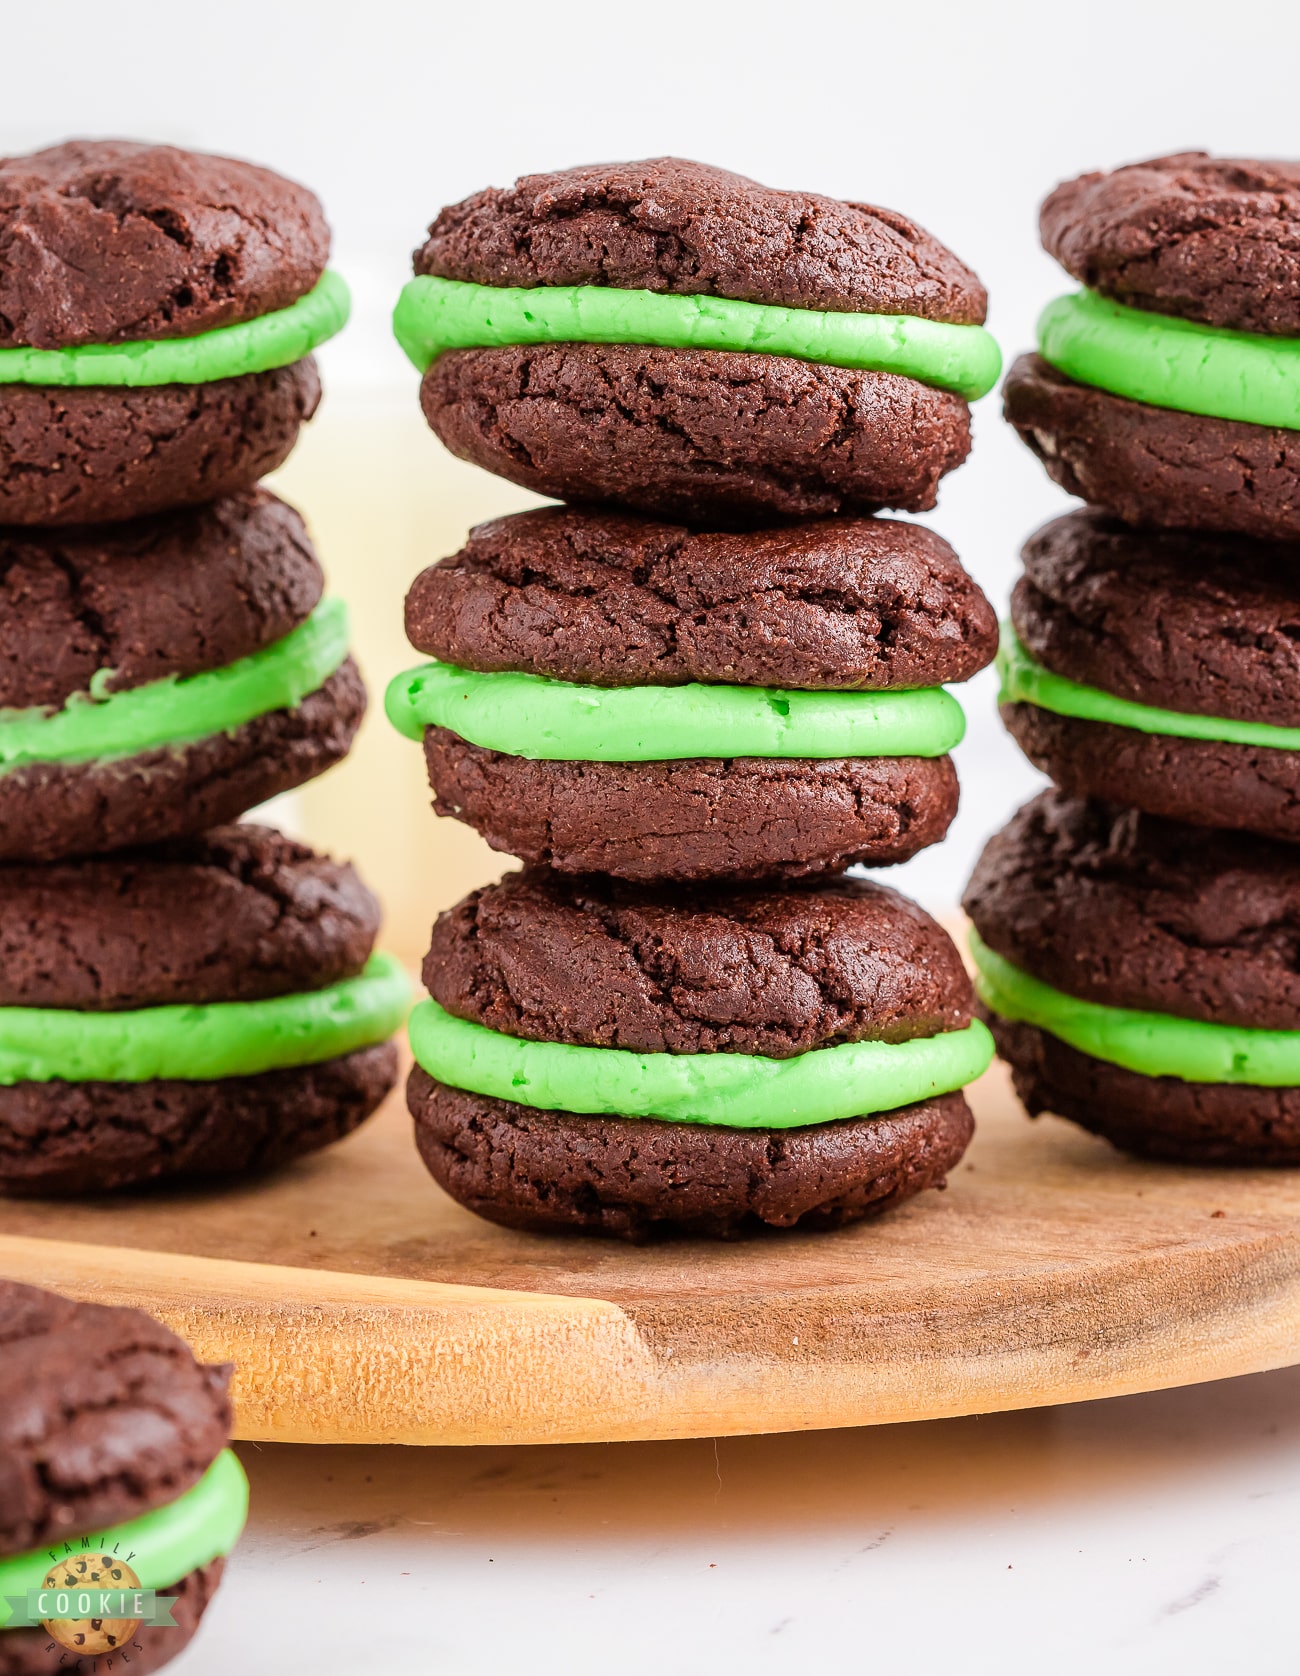 Stacks of mint oreo cookies made with cake mix.